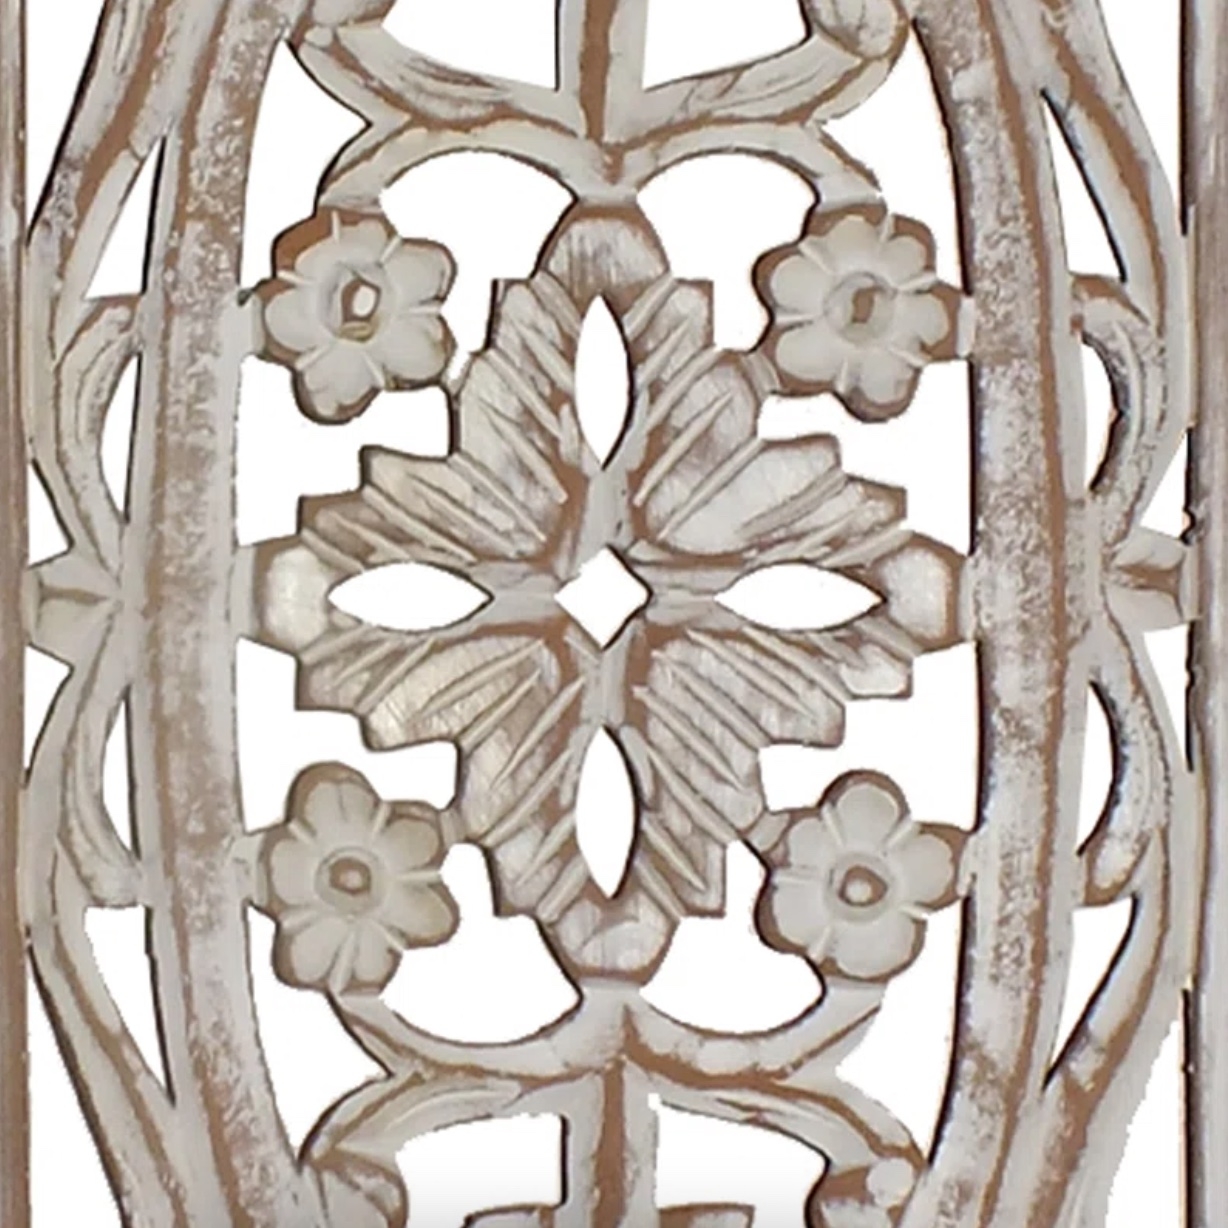 Rectangular Mango Wood Panel with Intricate Carving Wall Décor - Image 1